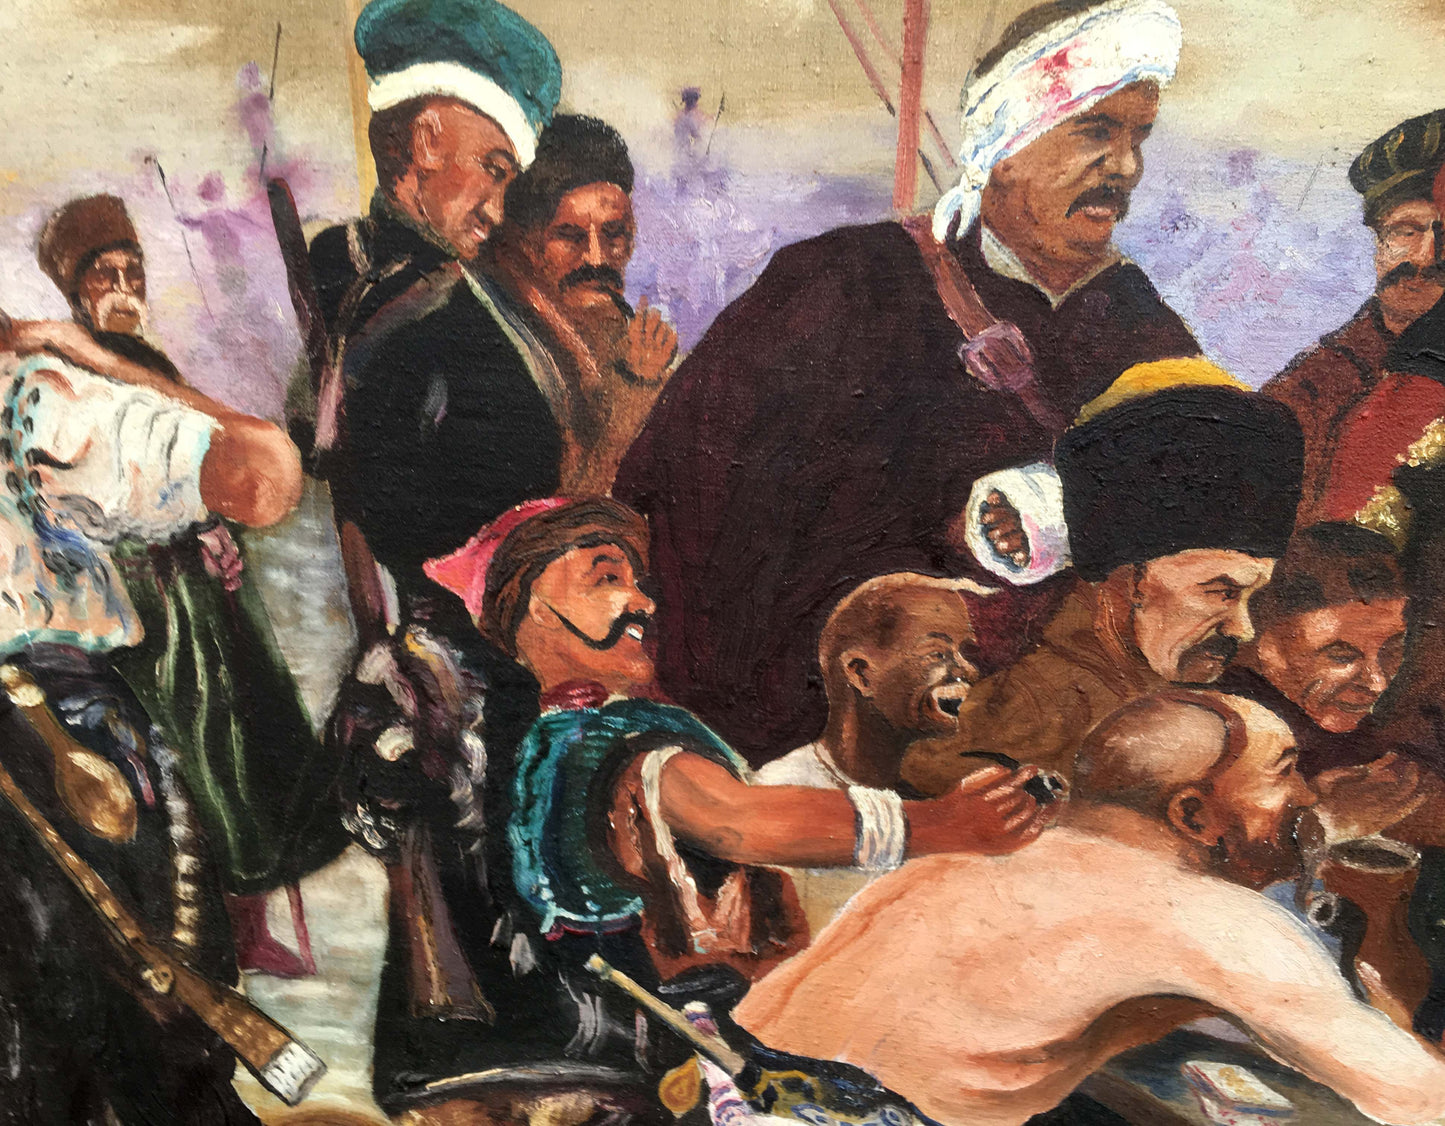 Cossacks depicted in oil on canvas